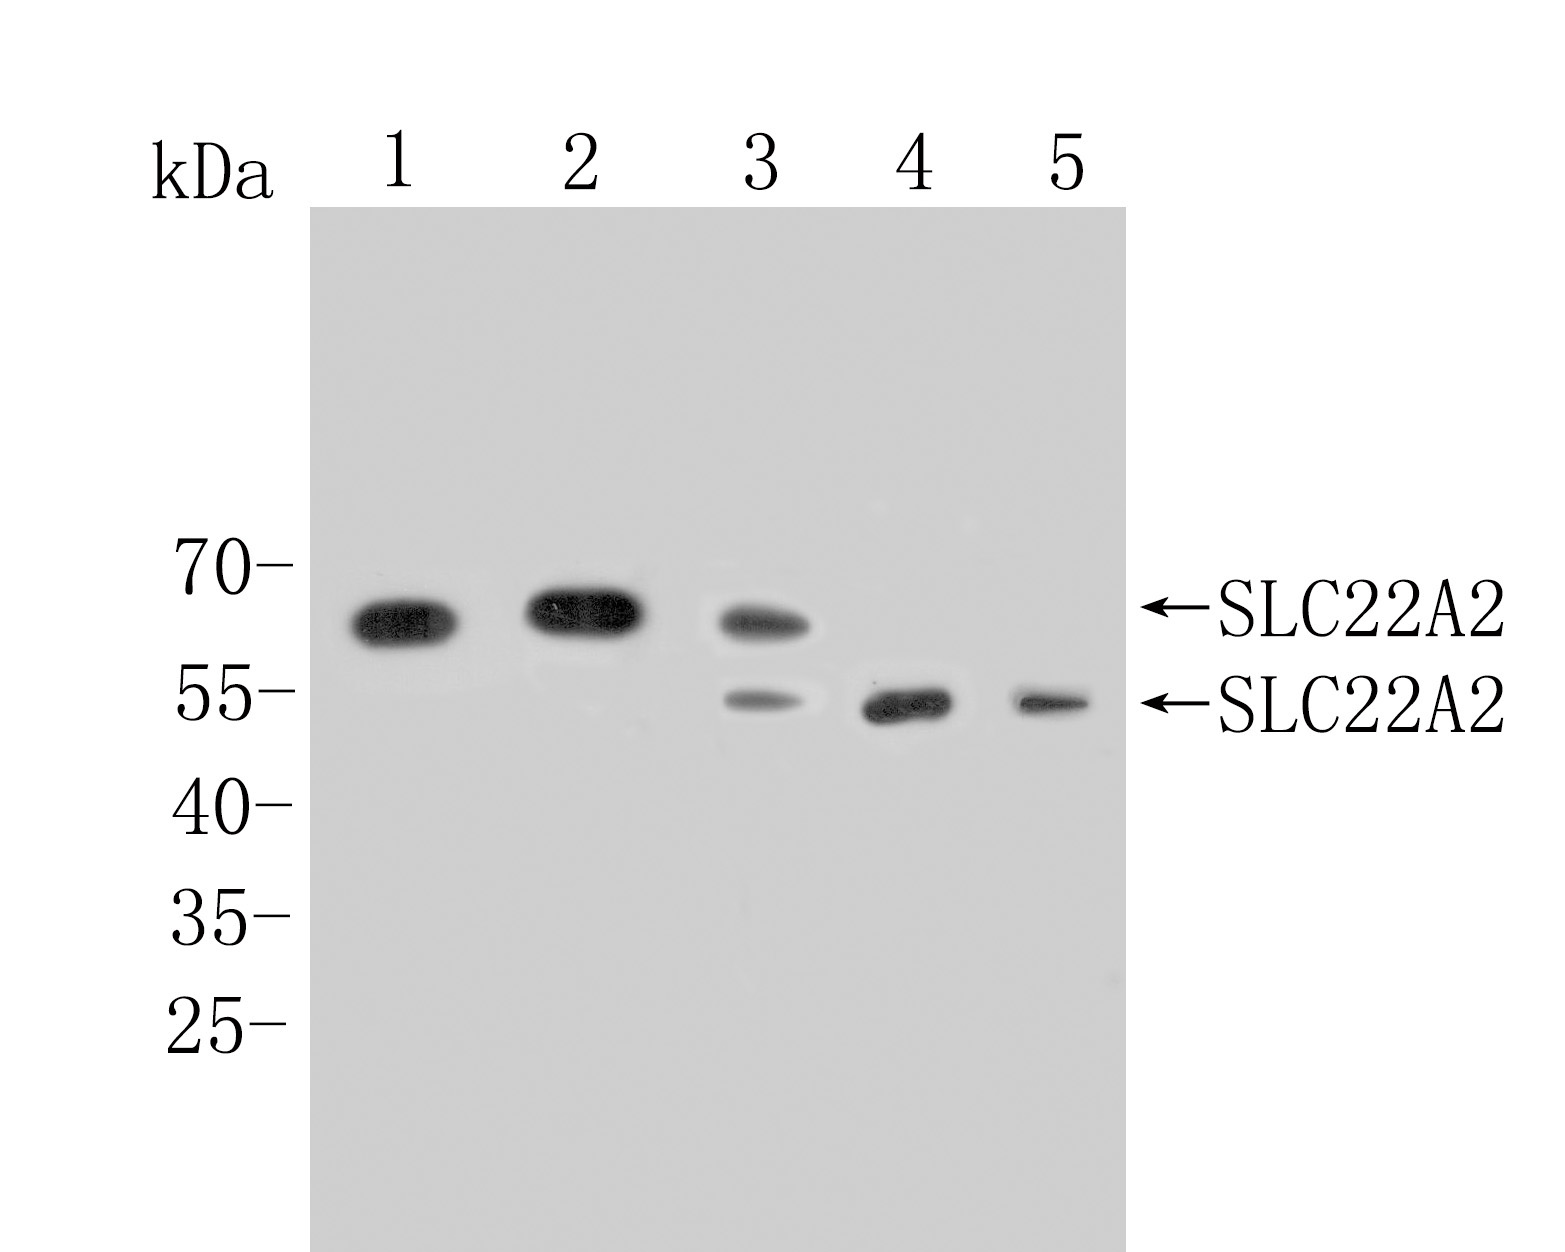 Western blot analysis of SLC22A2 on different lysates. Proteins were transferred to a PVDF membrane and blocked with 5% NFDM/TBST for 1 hour at room temperature. The primary antibody (HA500306, 1/1,000) was used in 5% NFDM/TBST at room temperature for 2 hours. Goat Anti-Rabbit IgG - HRP Secondary Antibody (HA1001) at 1:200,000 dilution was used for 1 hour at room temperature.<br />
Positive control: <br />
Lane 1: HepG2 cell lysate<br />
Lane 2: 293T cell lysate<br />
Lane 3: Rat brain tissue lysate<br />
Lane 4: Mouse kidney tissue lysate<br />
Lane 5: Mouse brain tissue lysate